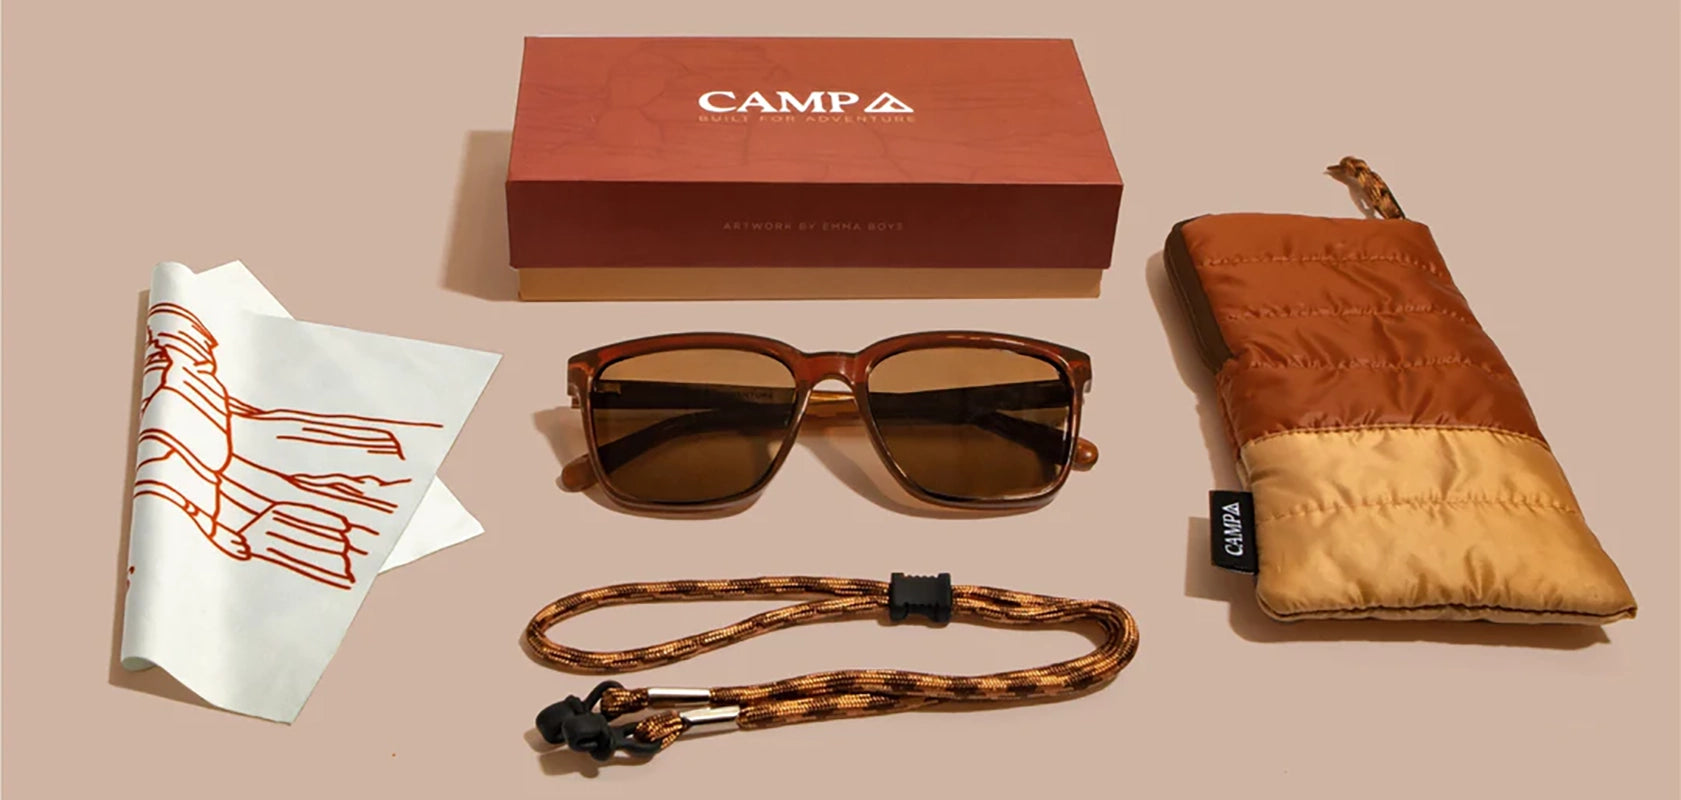 Camp Sunglasses limited edition National parks Packaging that includes: box, cleaning cloth with artwork on it, pouch, and sunglasses tether